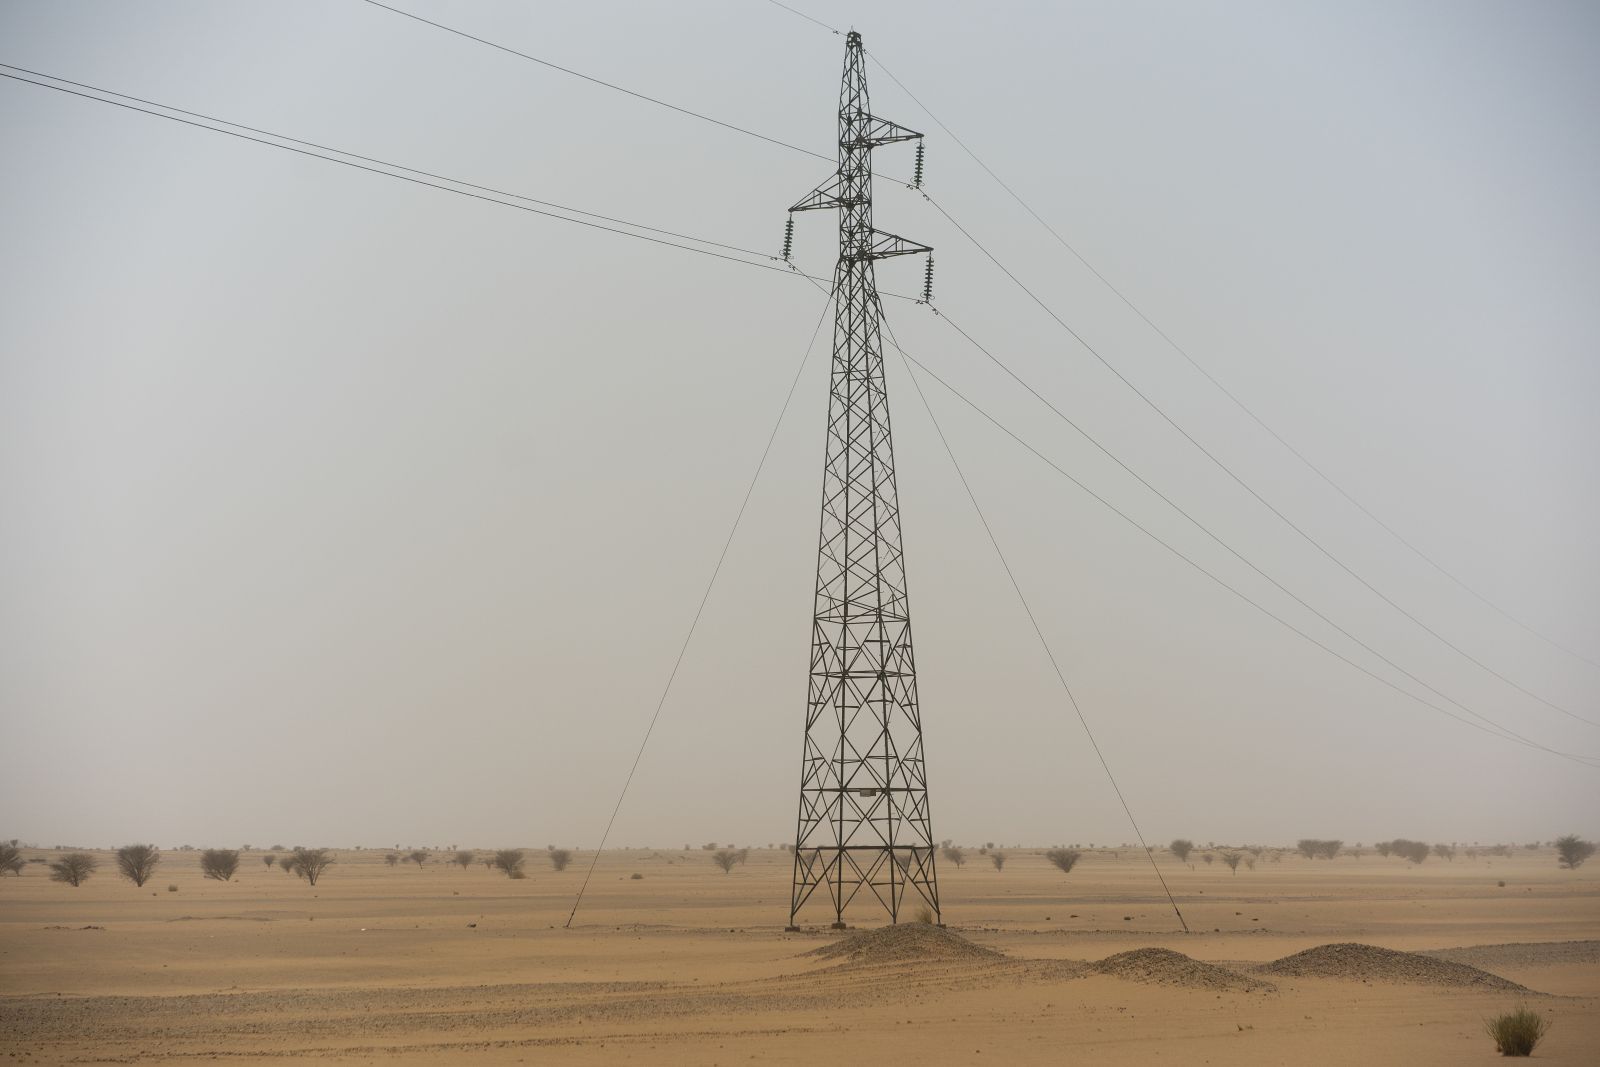 Infrastructure is vital for economic development: electricity pylon in the Sahara.